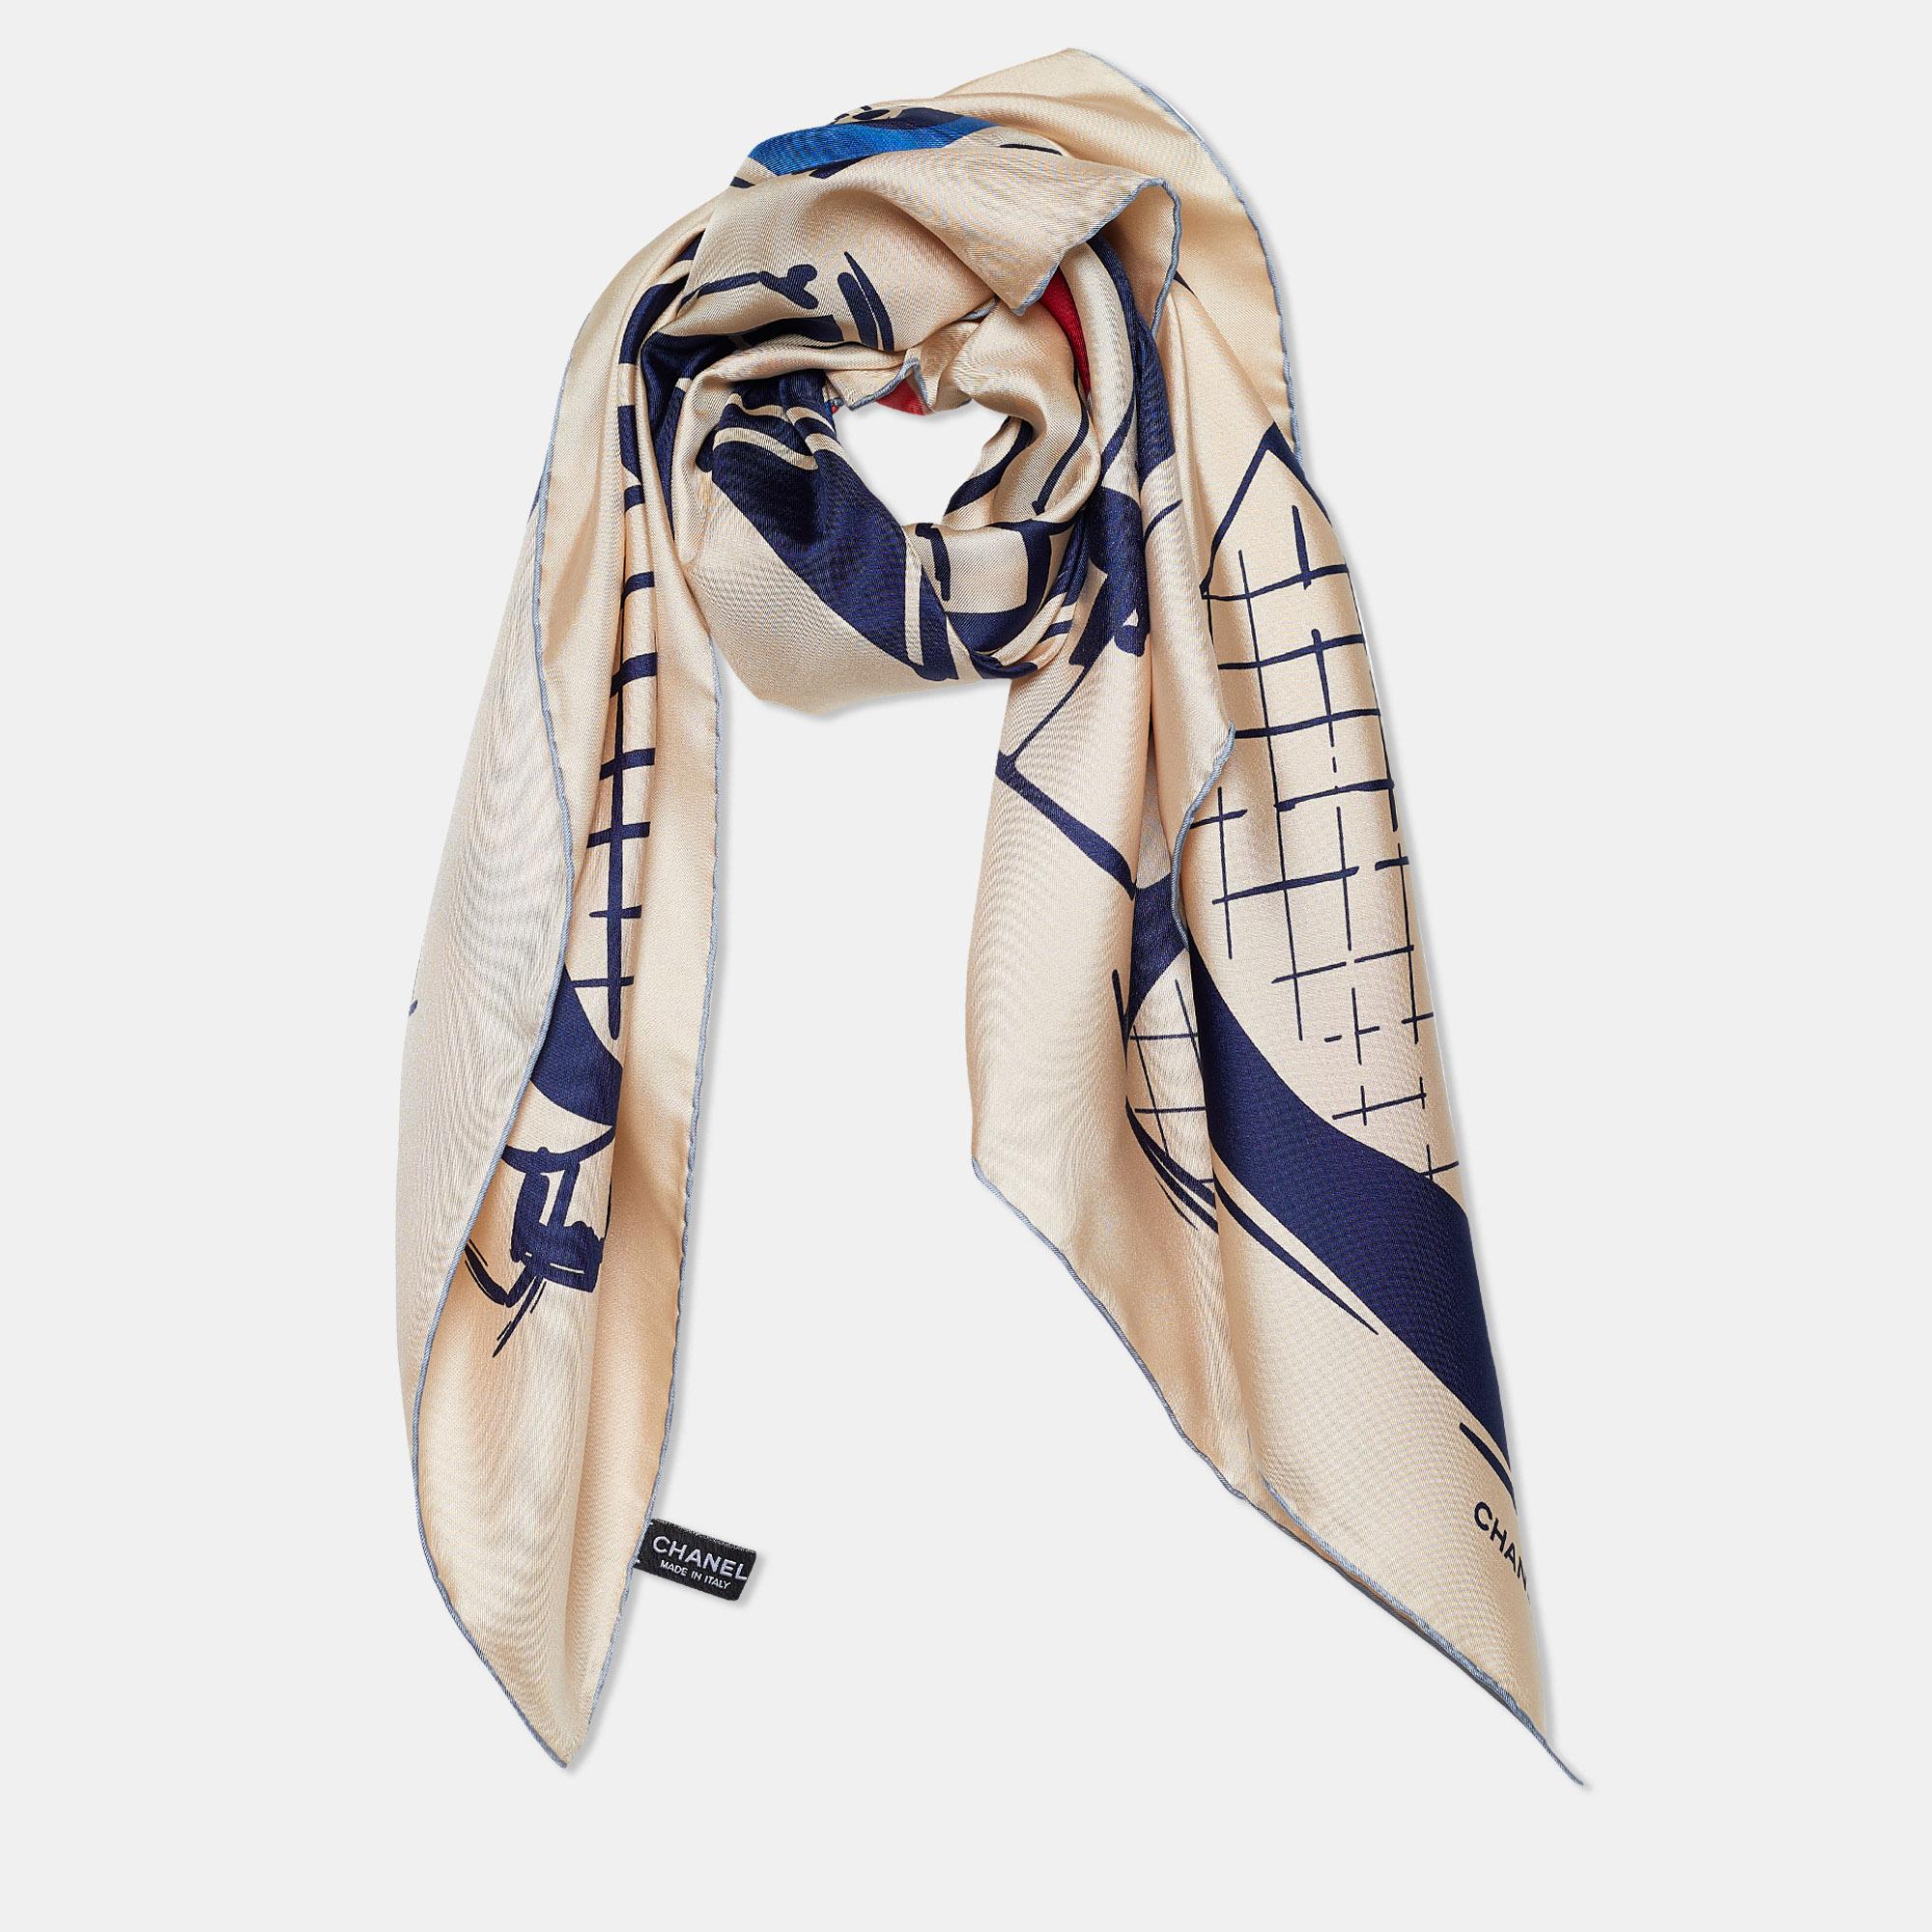 The perfect punctuation to your stylish look will be this Chanel scarf! It has been stitched using soft silk in a beige shade and adorned with Chanel handbag prints for a signature touch. Wrap it around your neck to accessorize the chic way!

